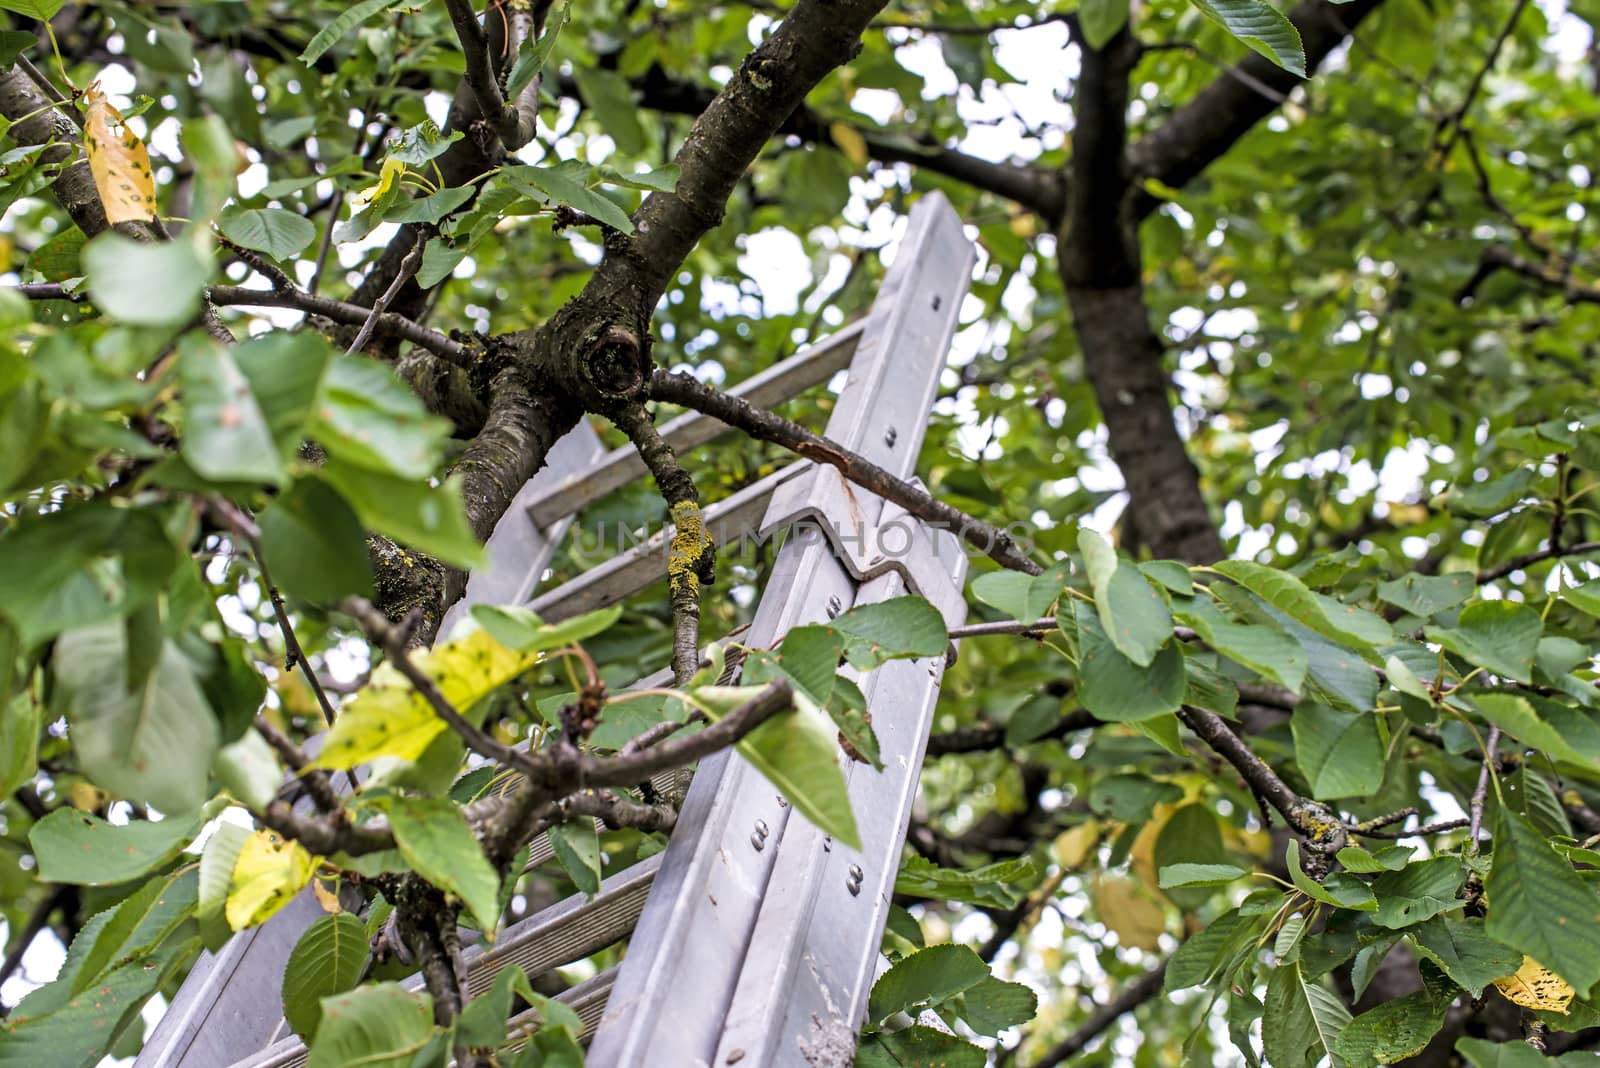 ladder at a fruit tree